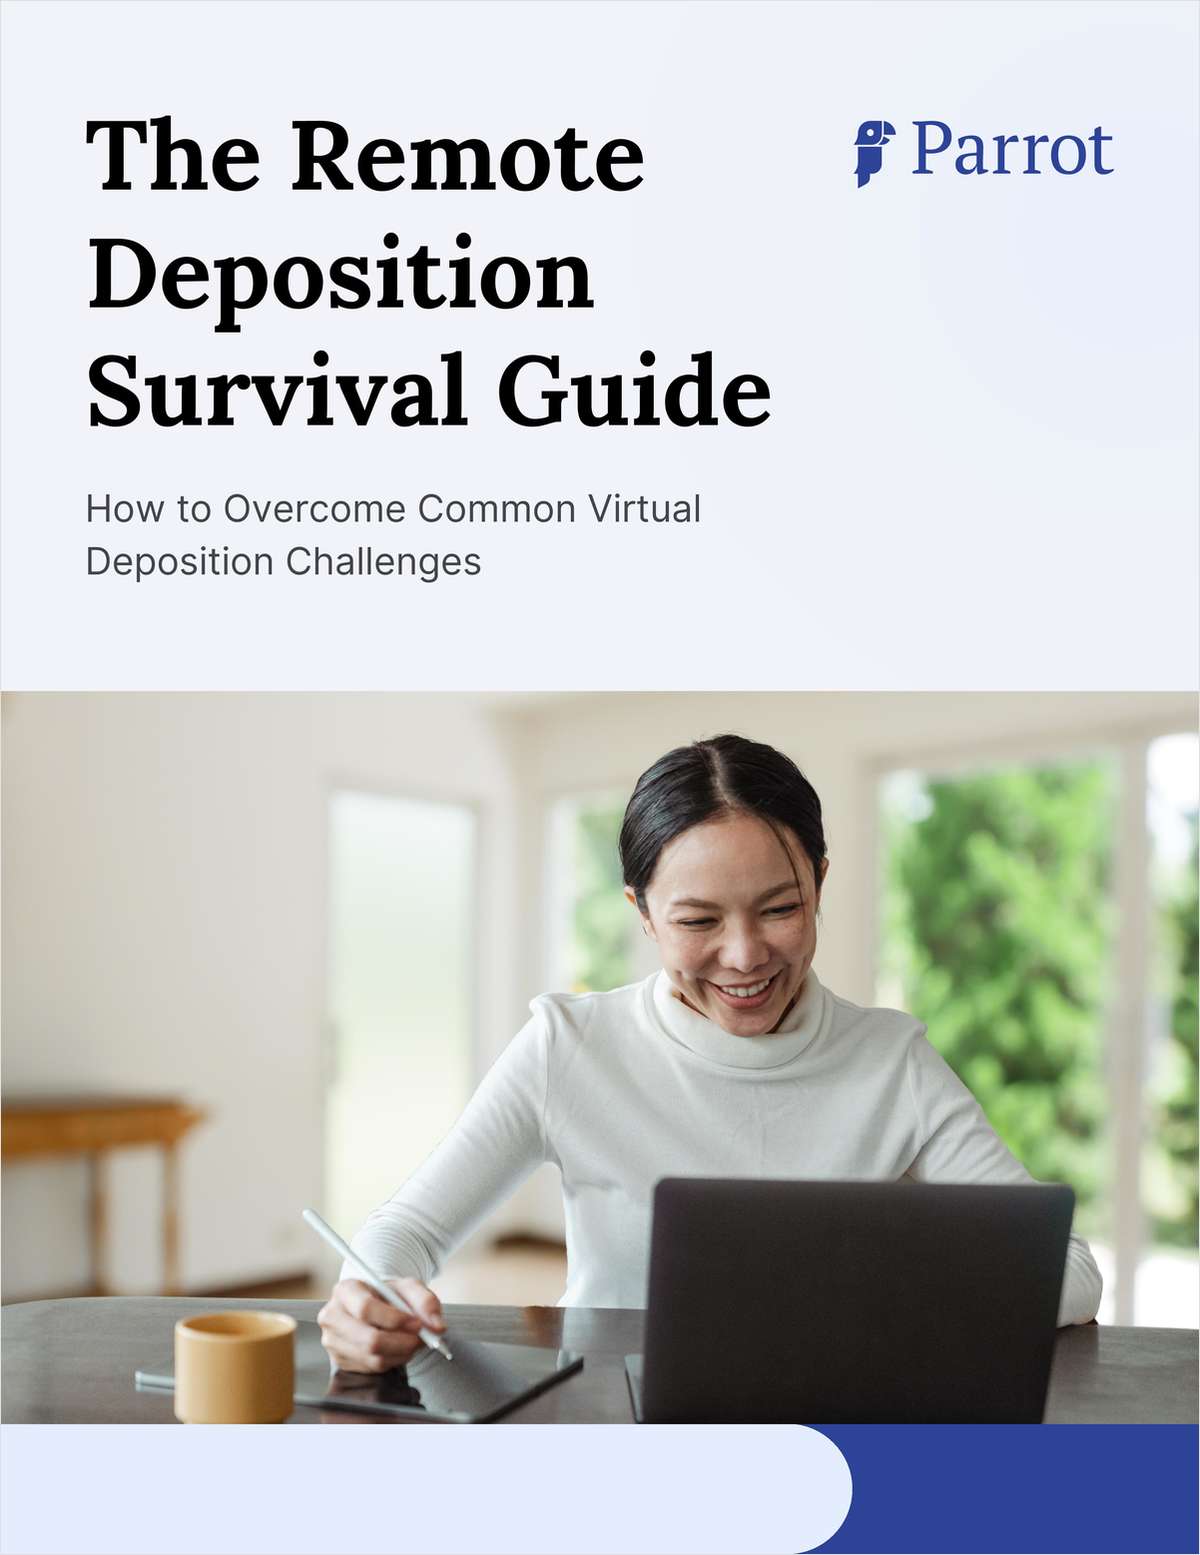 The Remote Deposition Survival Guide: How to Overcome Common Virtual Deposition Challenges